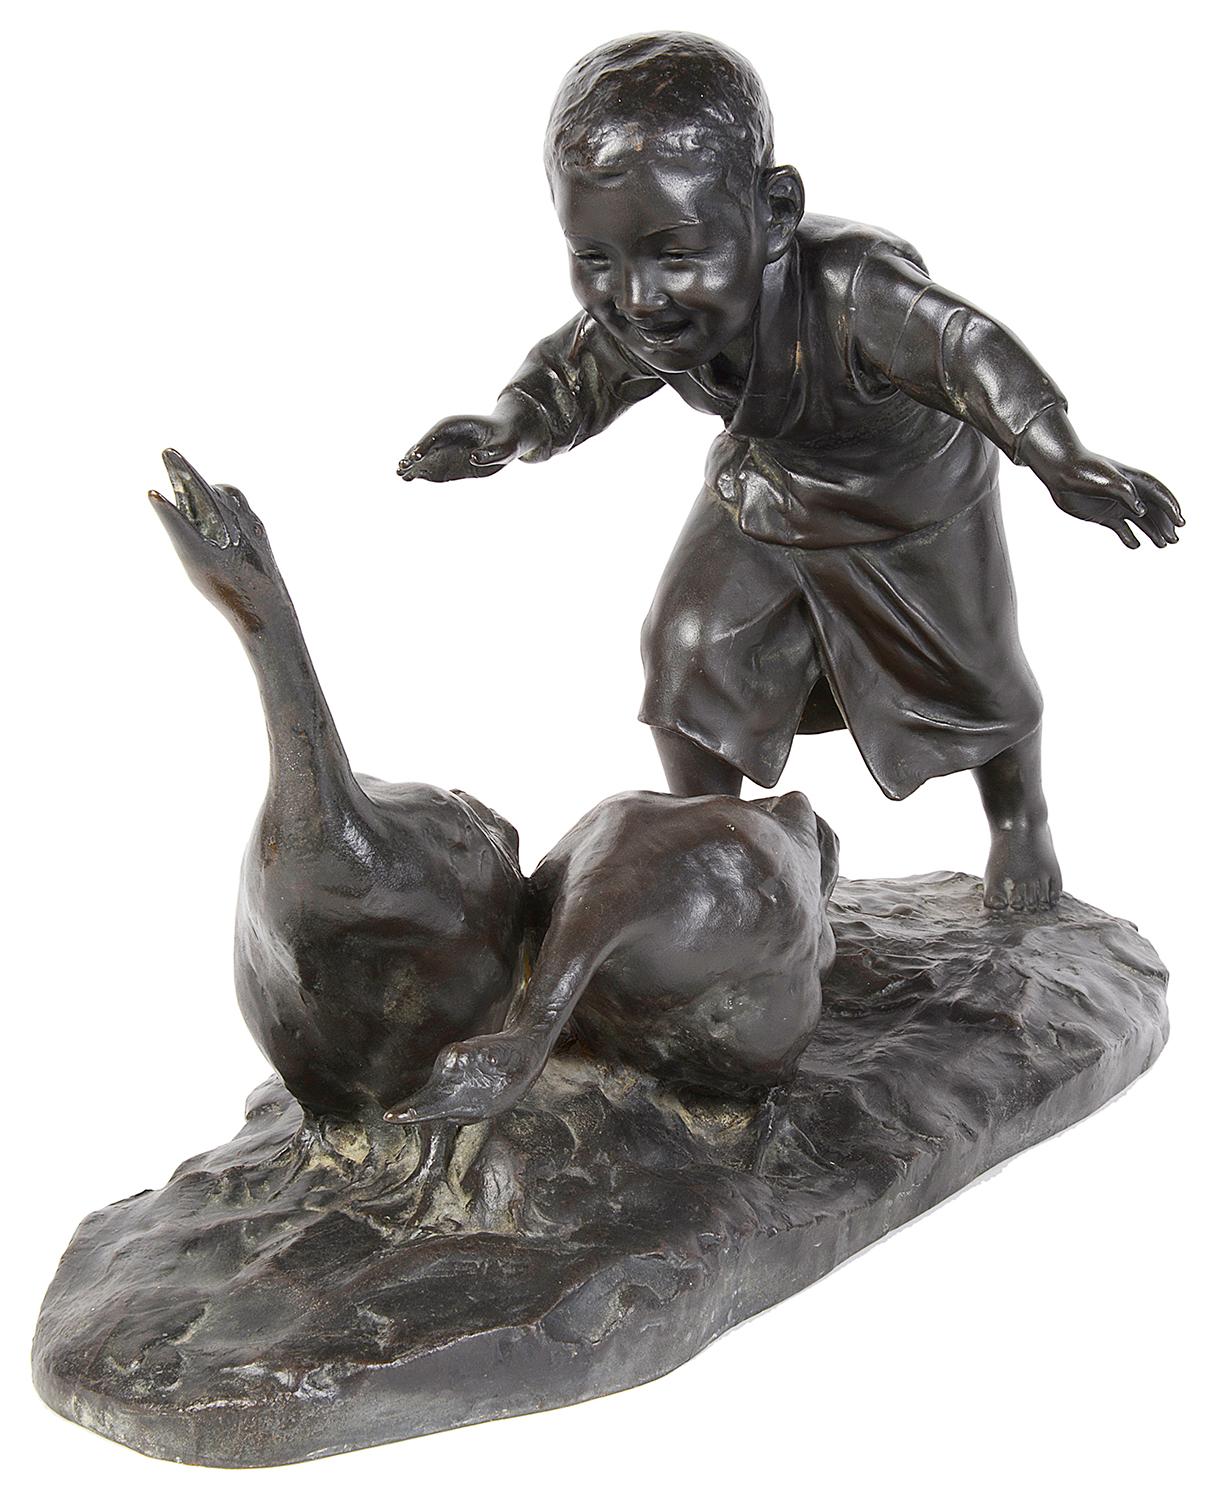 A very good quality 19th century (Meiji period 1868-1912) Japanese bronze study of a young boy chasing two geese.